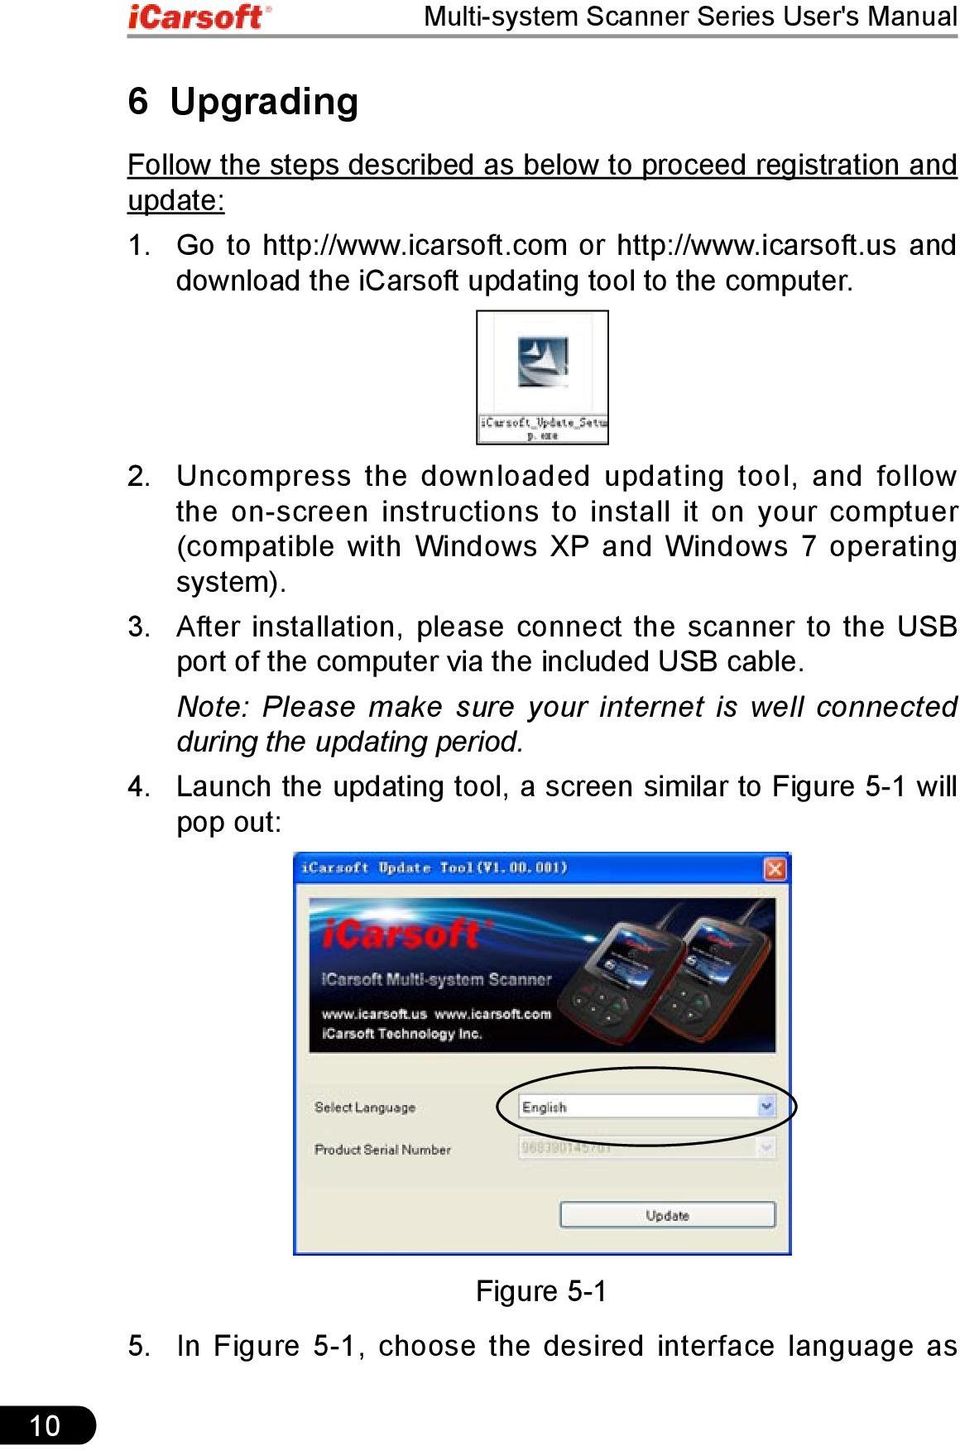 Uncompress the downloaded updating tool, and follow the on-screen instructions to install it on your comptuer (compatible with Windows XP and Windows 7 operating system). 3.